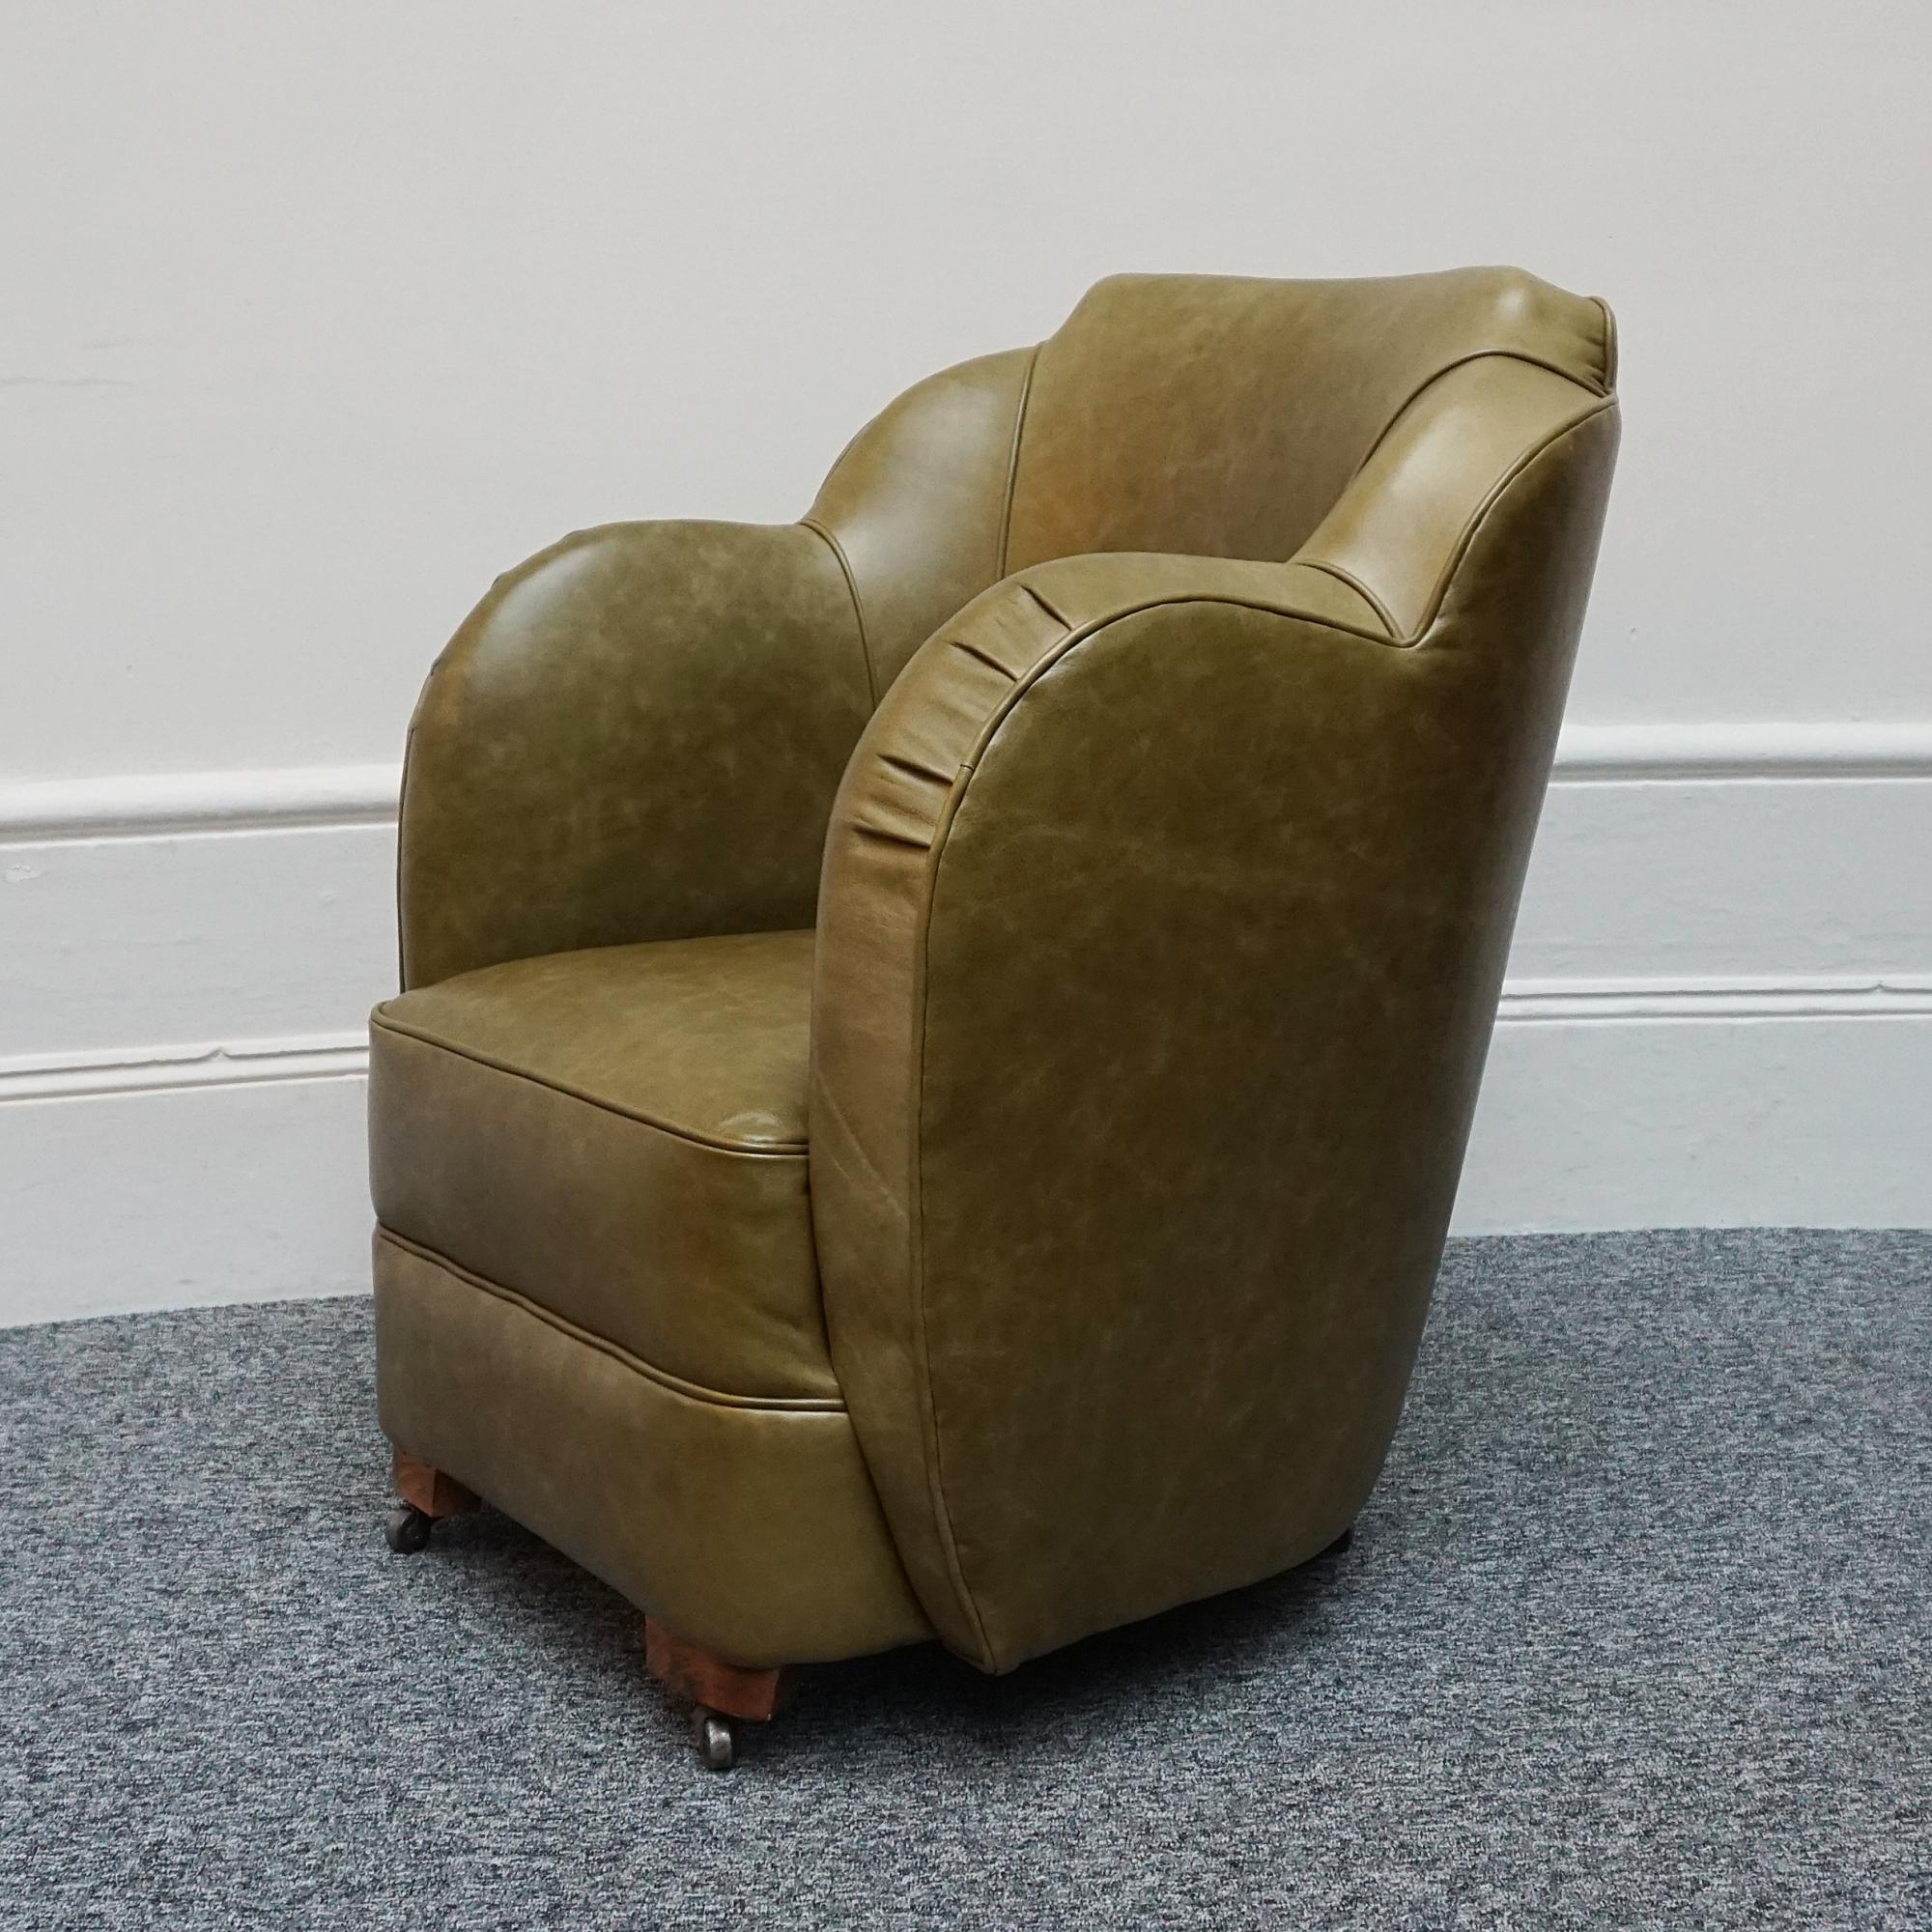 An Art Deco Cloud chair. Original walnut castors, re-upholstered in olive green leather with ruched arm rests.

Dimensions: H 82cm W 68cm D 50cm 

Origin: English

Date: 1935

Item Number: 2102243

